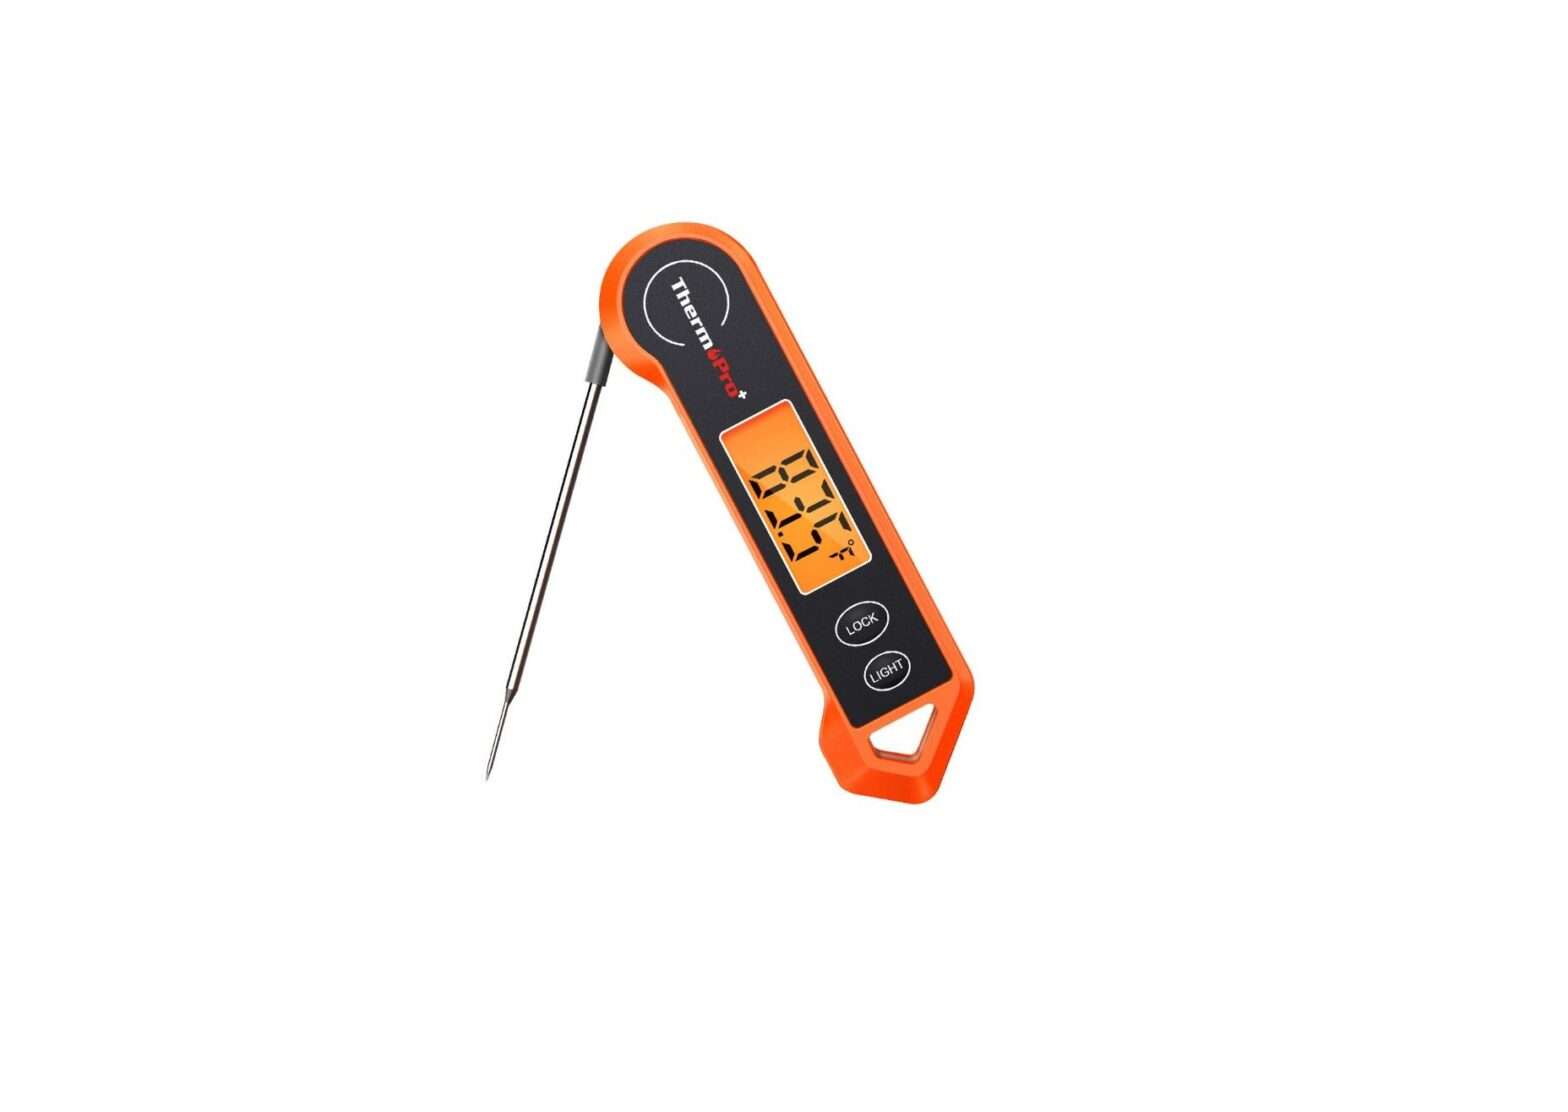 ThermoPro TP19H Digital Meat Thermometer User Manual - Featured image